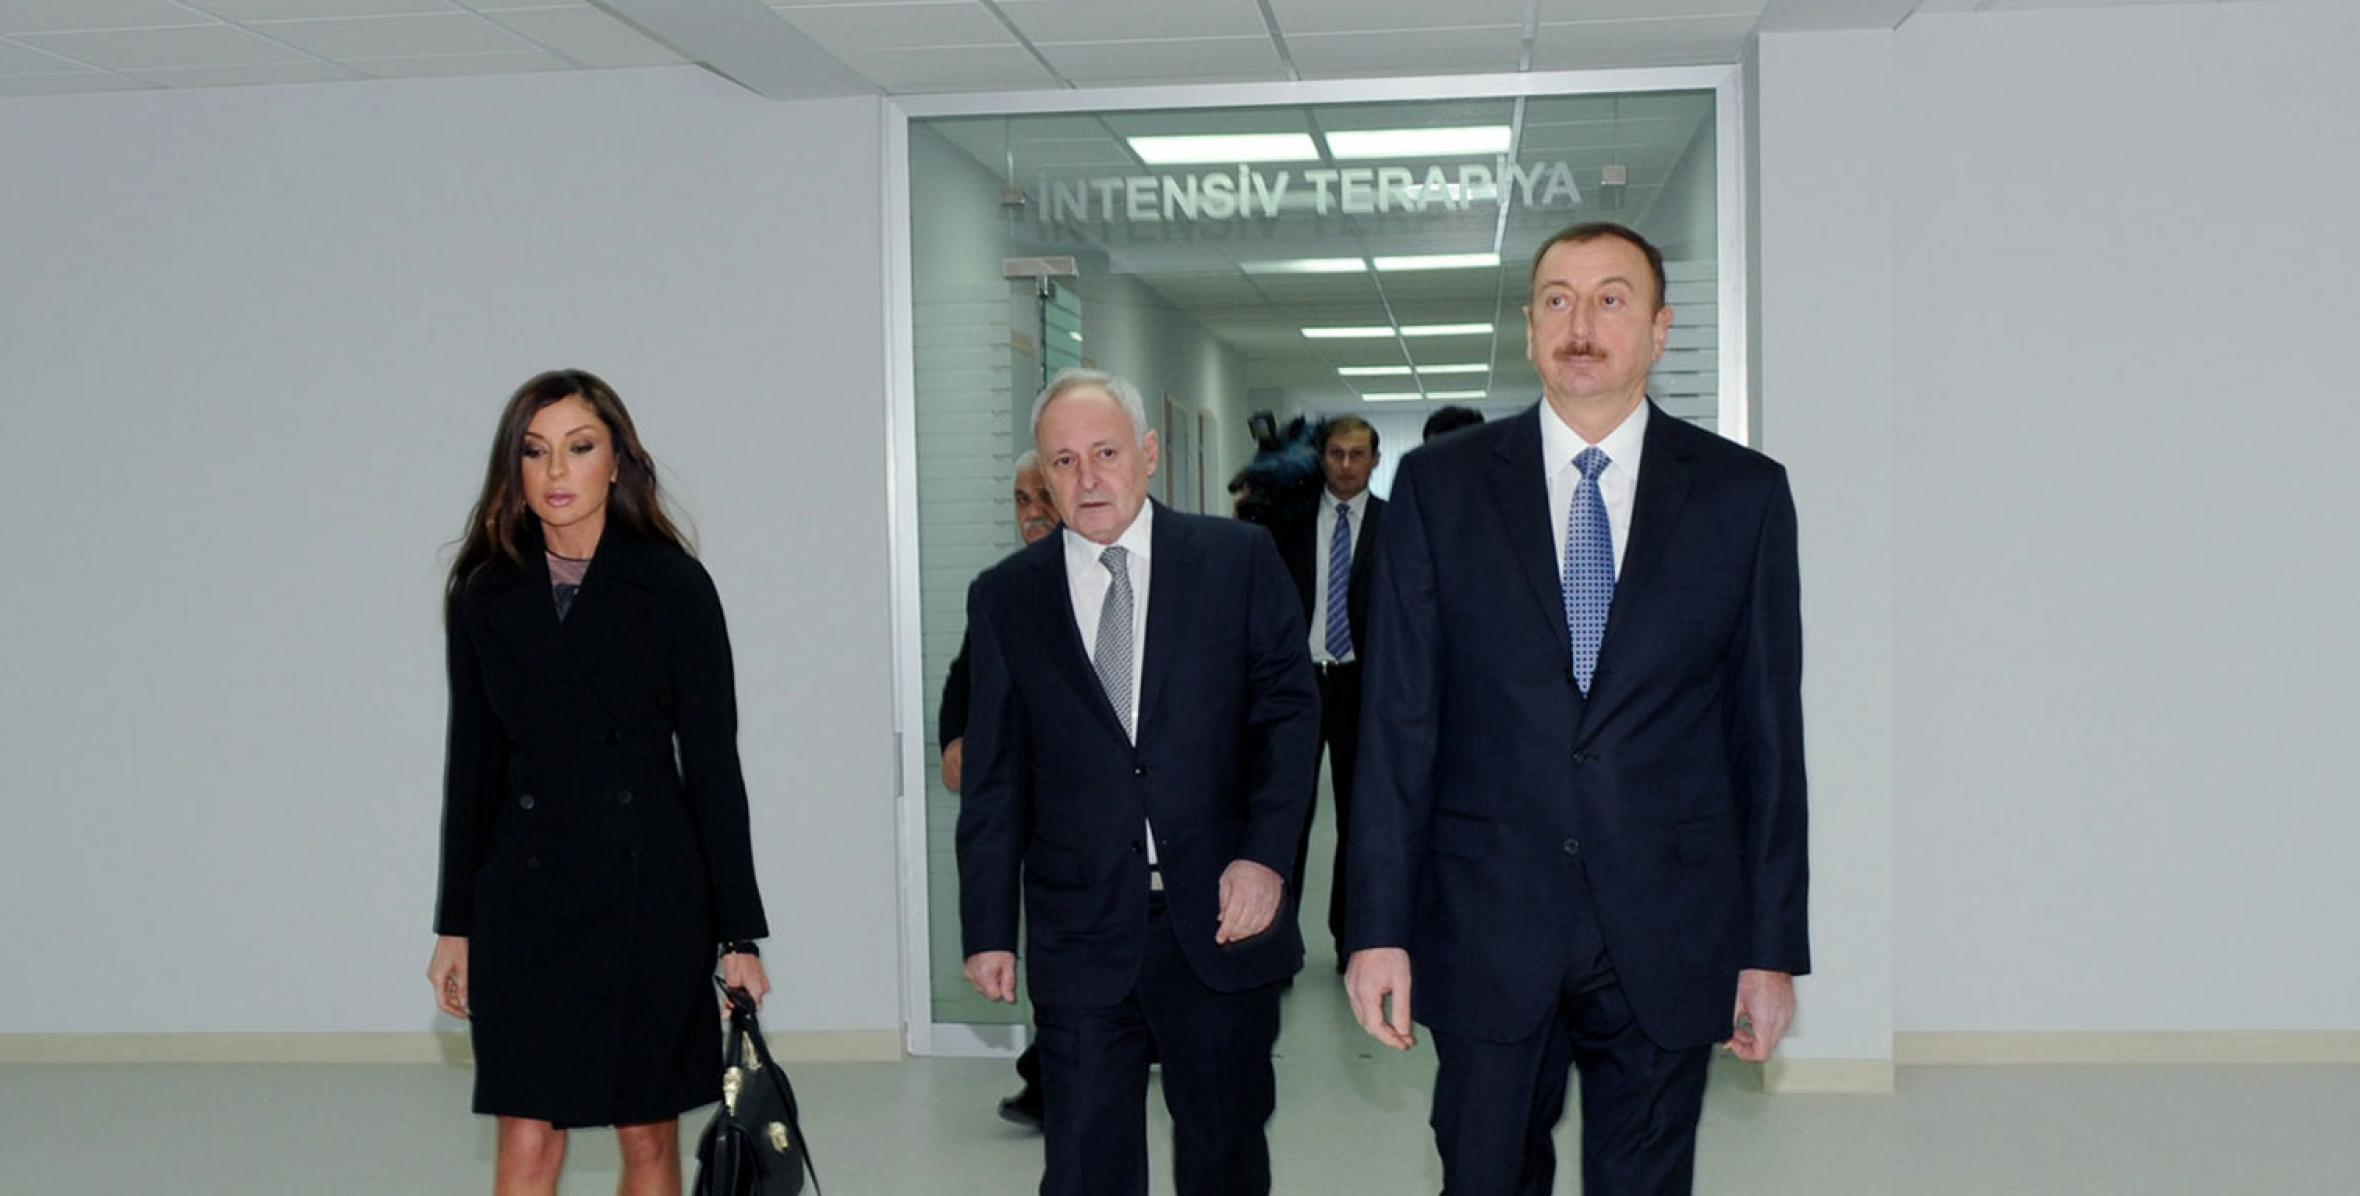 Ilham Aliyev reviewed the Children’s Neurological Hospital commissioned after major overhaul